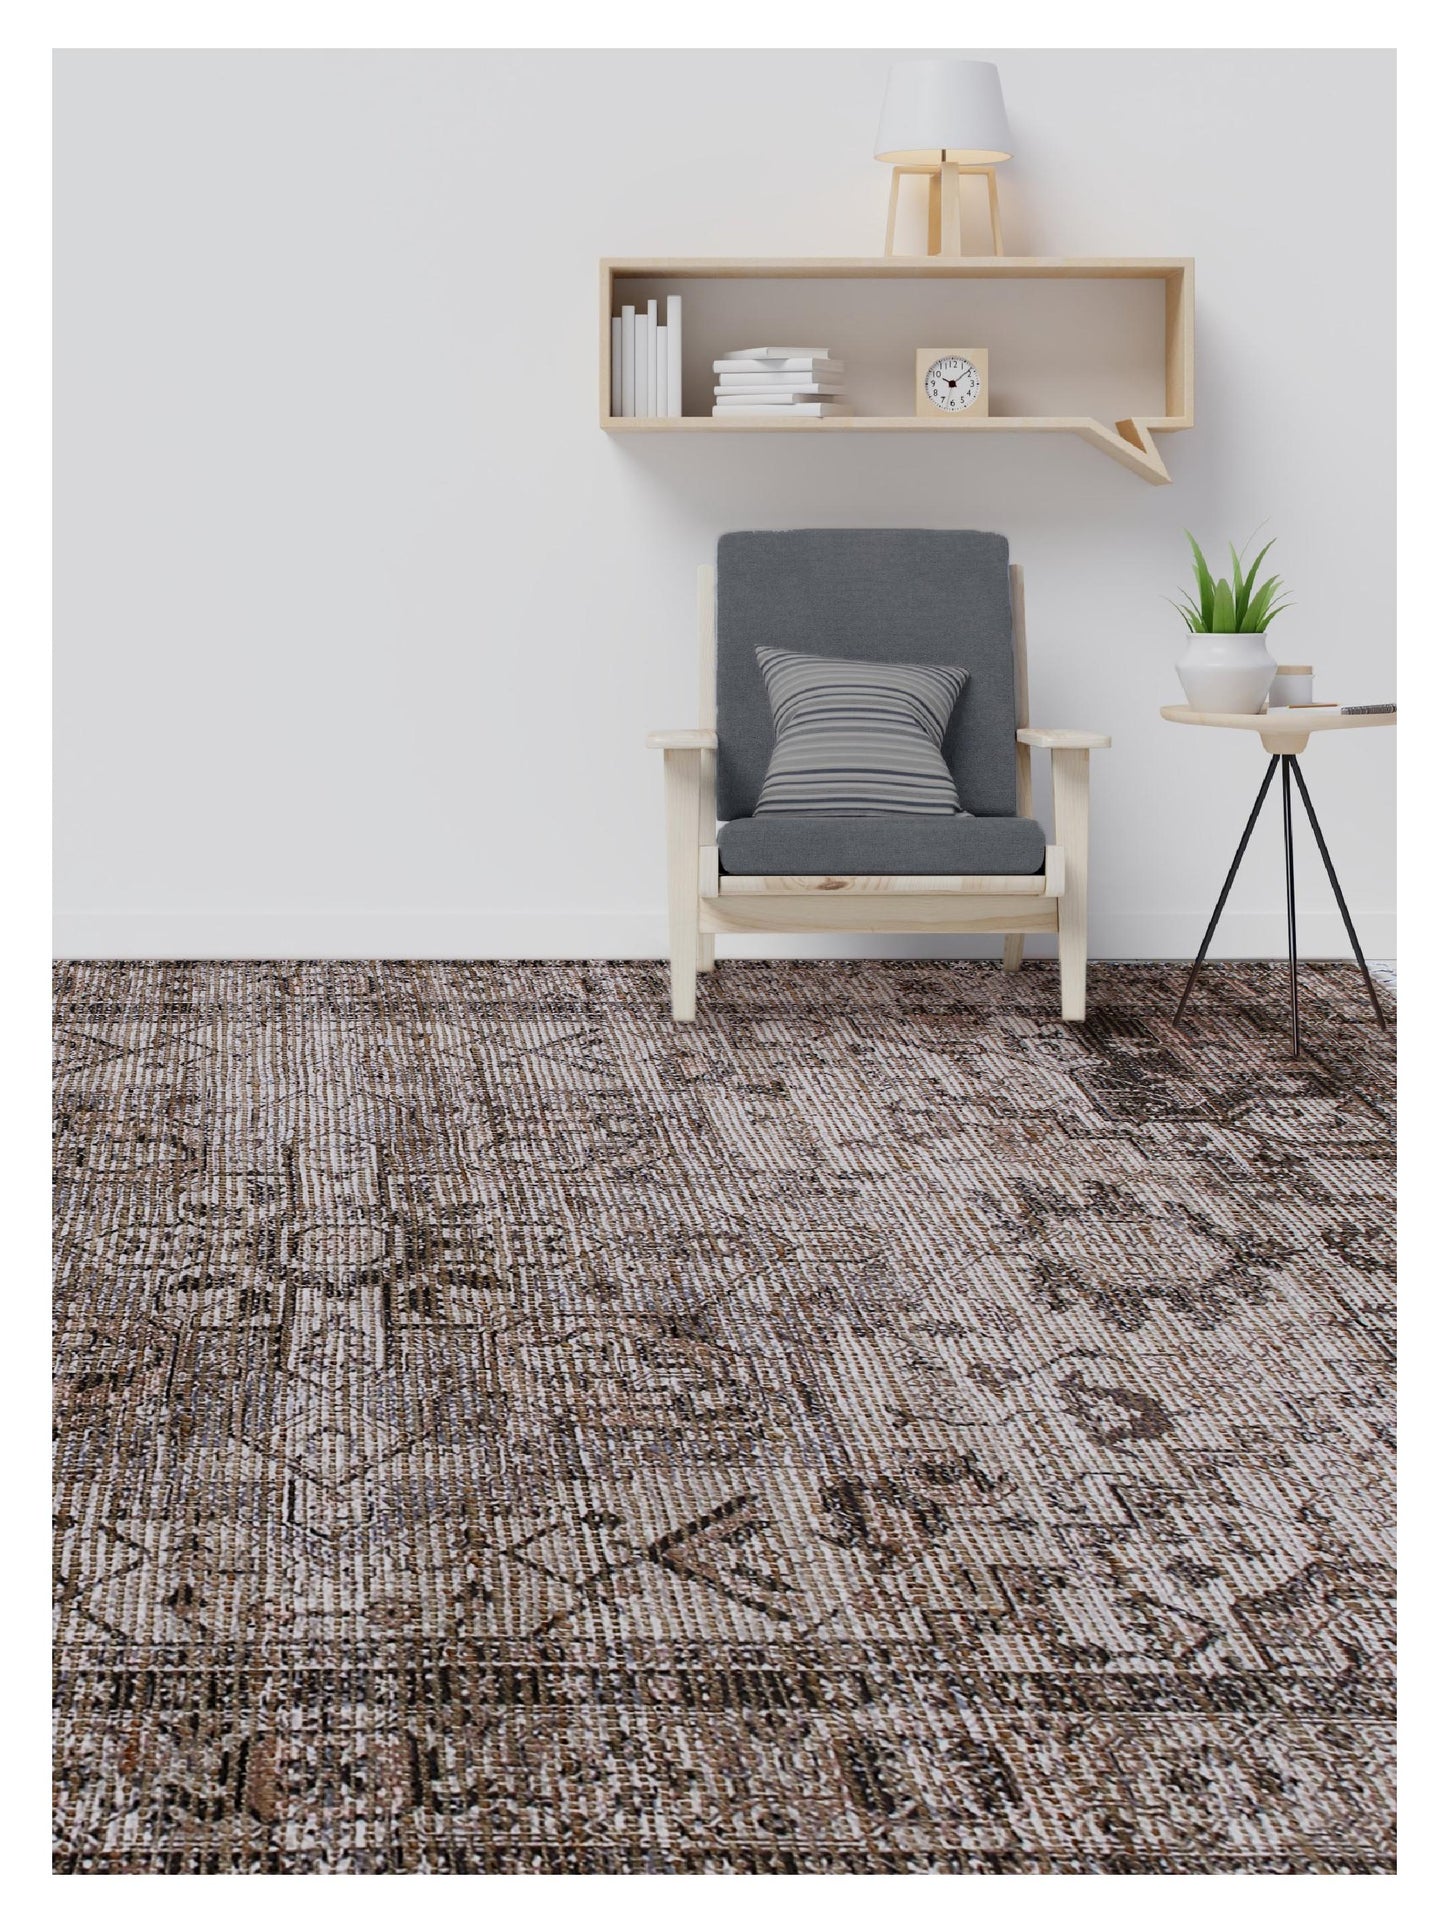 Limited PALMDALE PA-356 DOVE GRAY Kilim Woven Rug